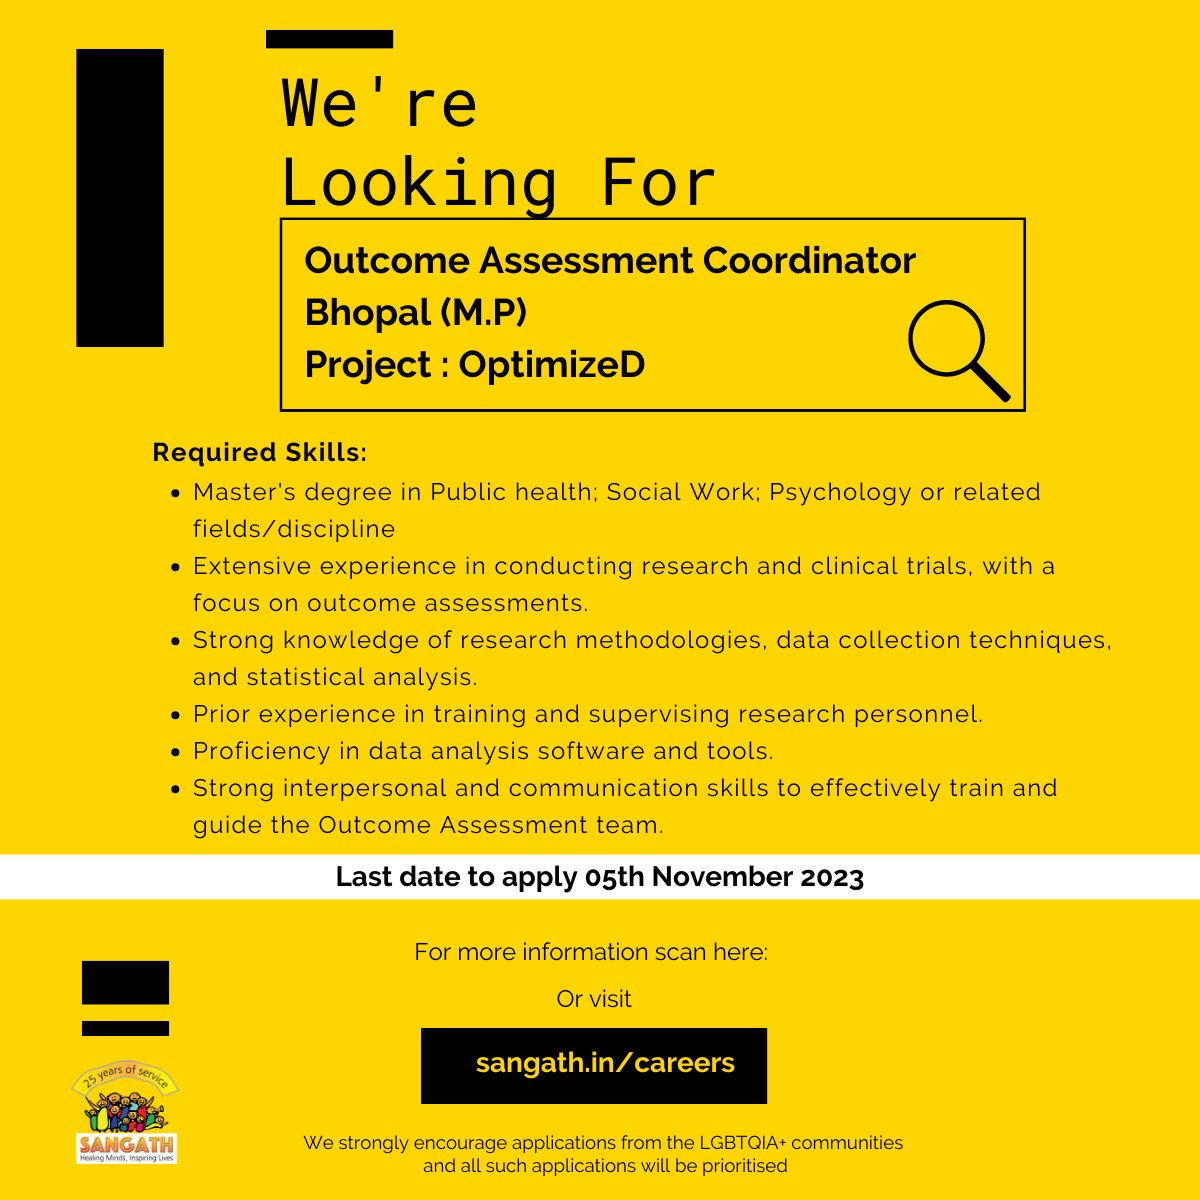 We are looking for Outcome Assessment Coordinator for our OptimizeD Project.
Location: Bhopal, Madhya Pradesh
Position : 01
Apply before 05th November 2023, through google link bit.ly/OACRO1

For details, visit sangath.in/careers/

#hiringnow #hiringimmediately